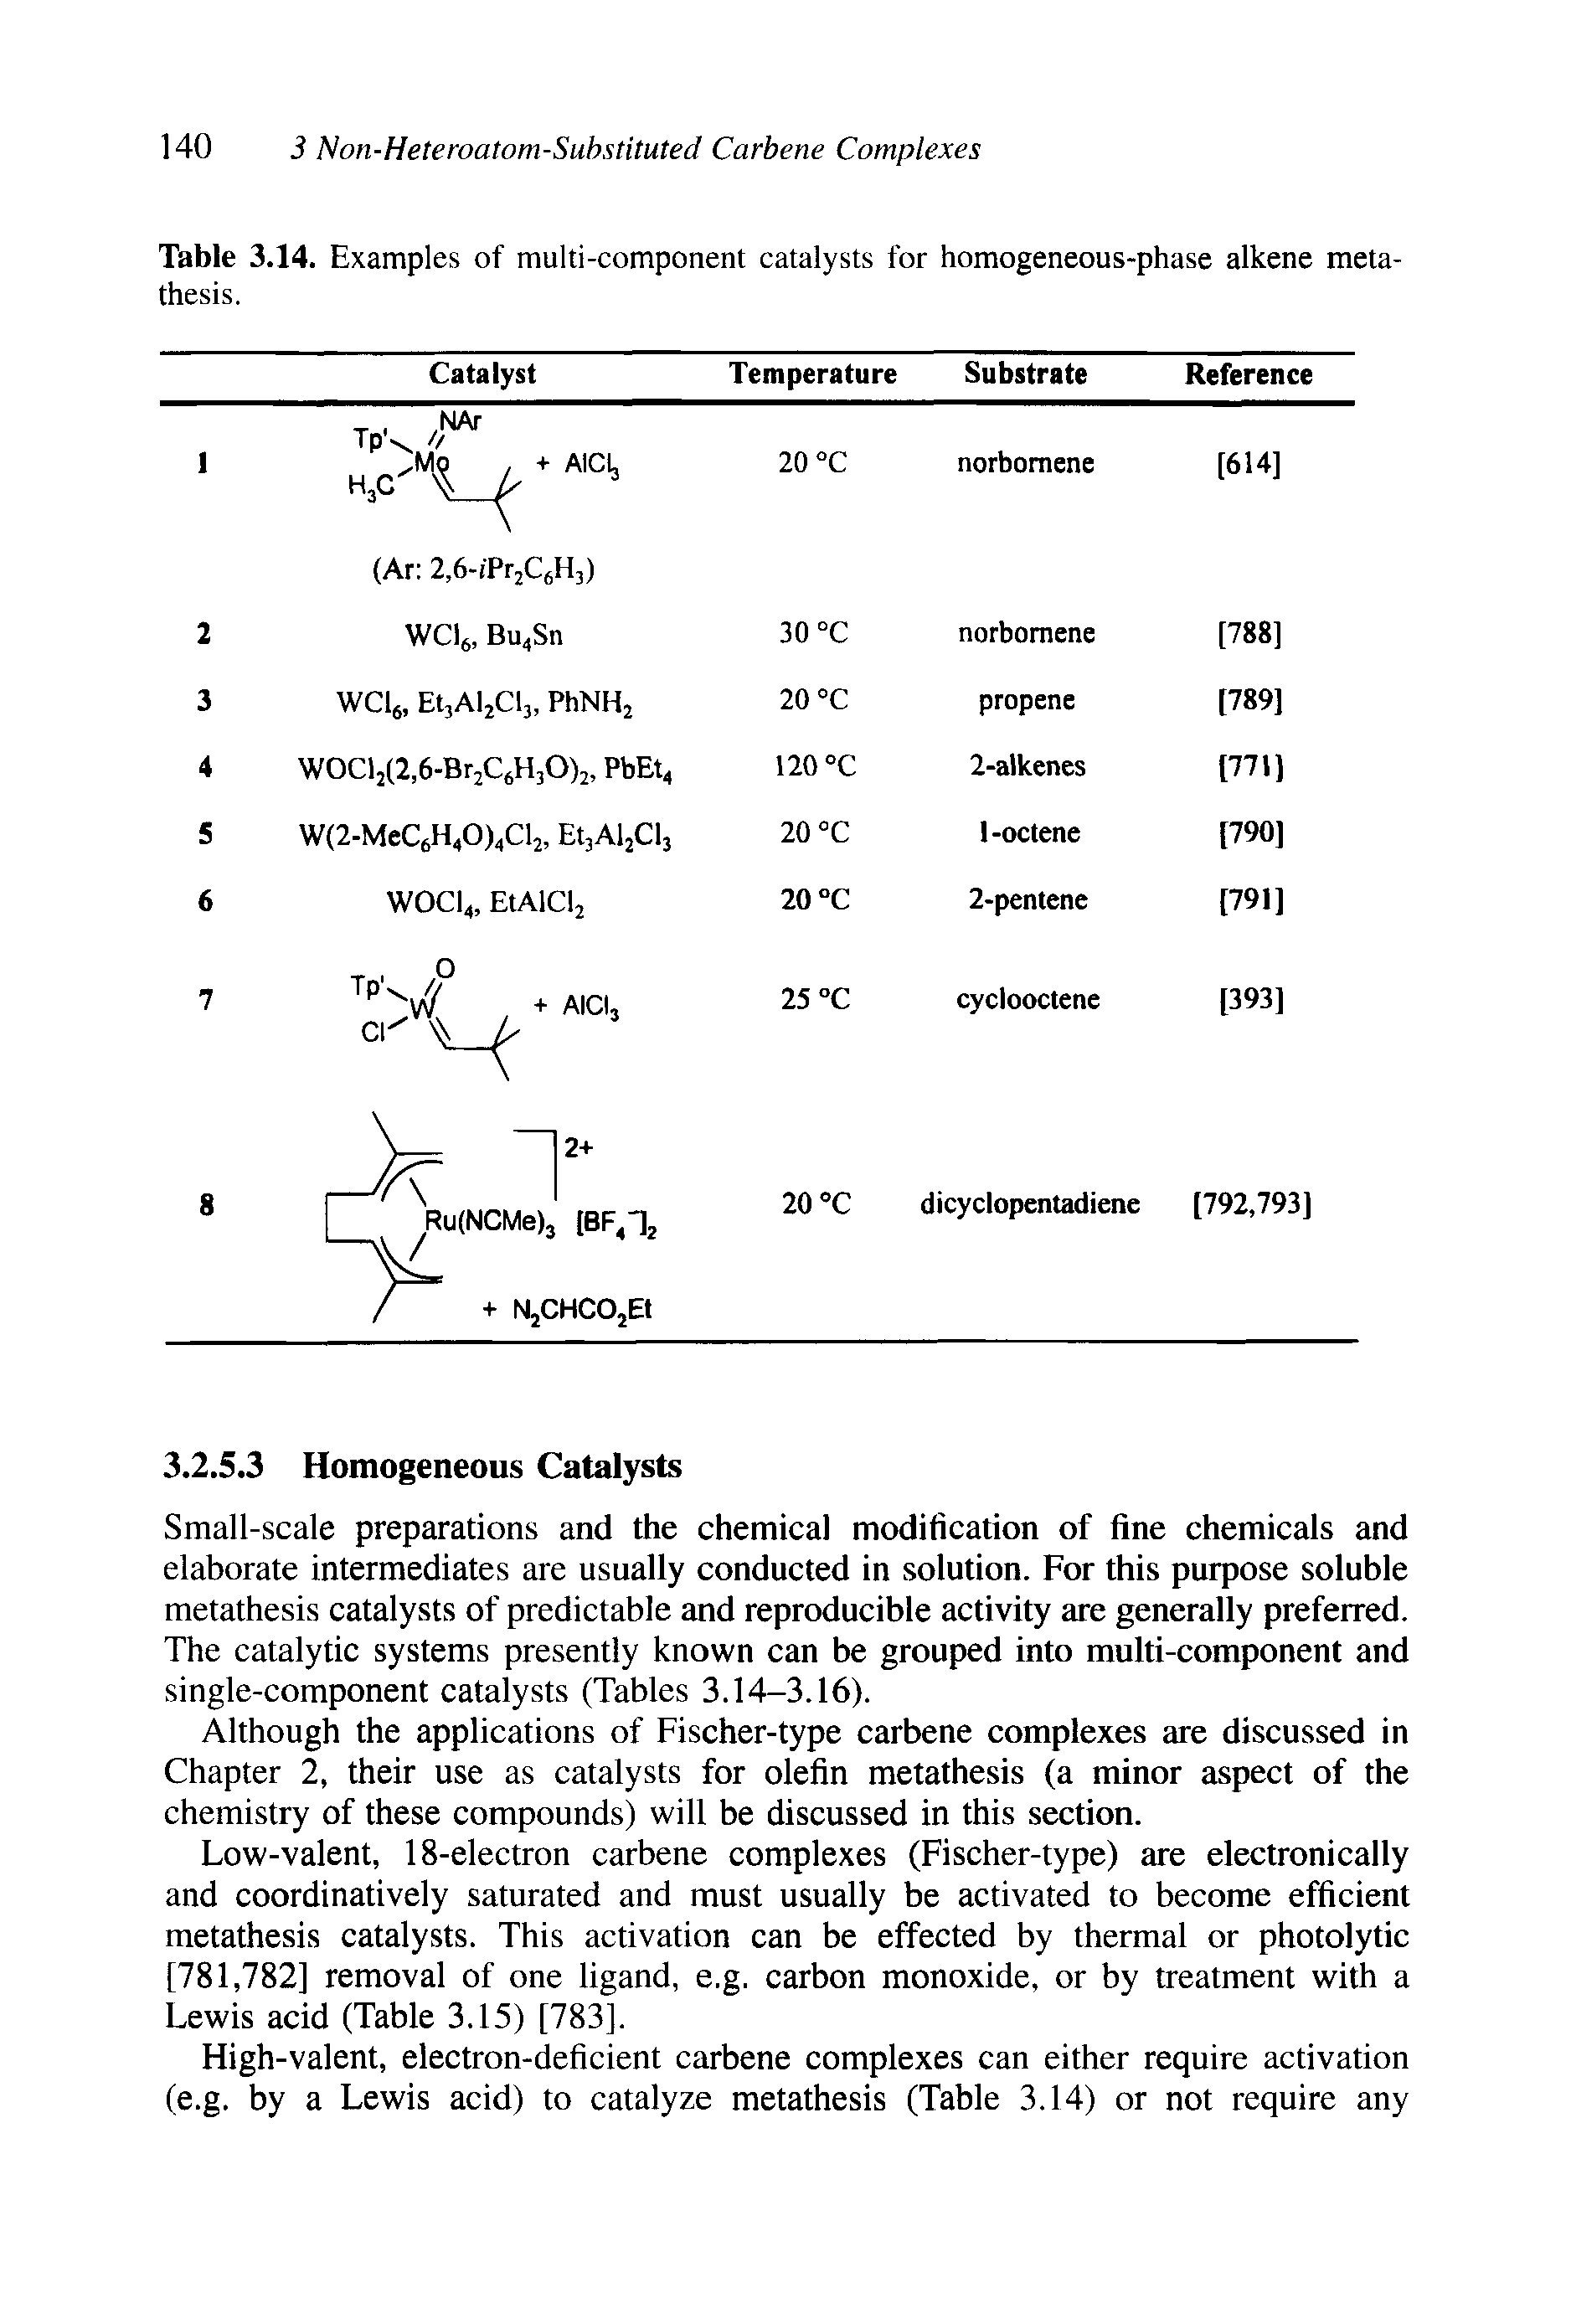 Table 3.14. Examples of multi-component catalysts for homogeneous-phase alkene metathesis.